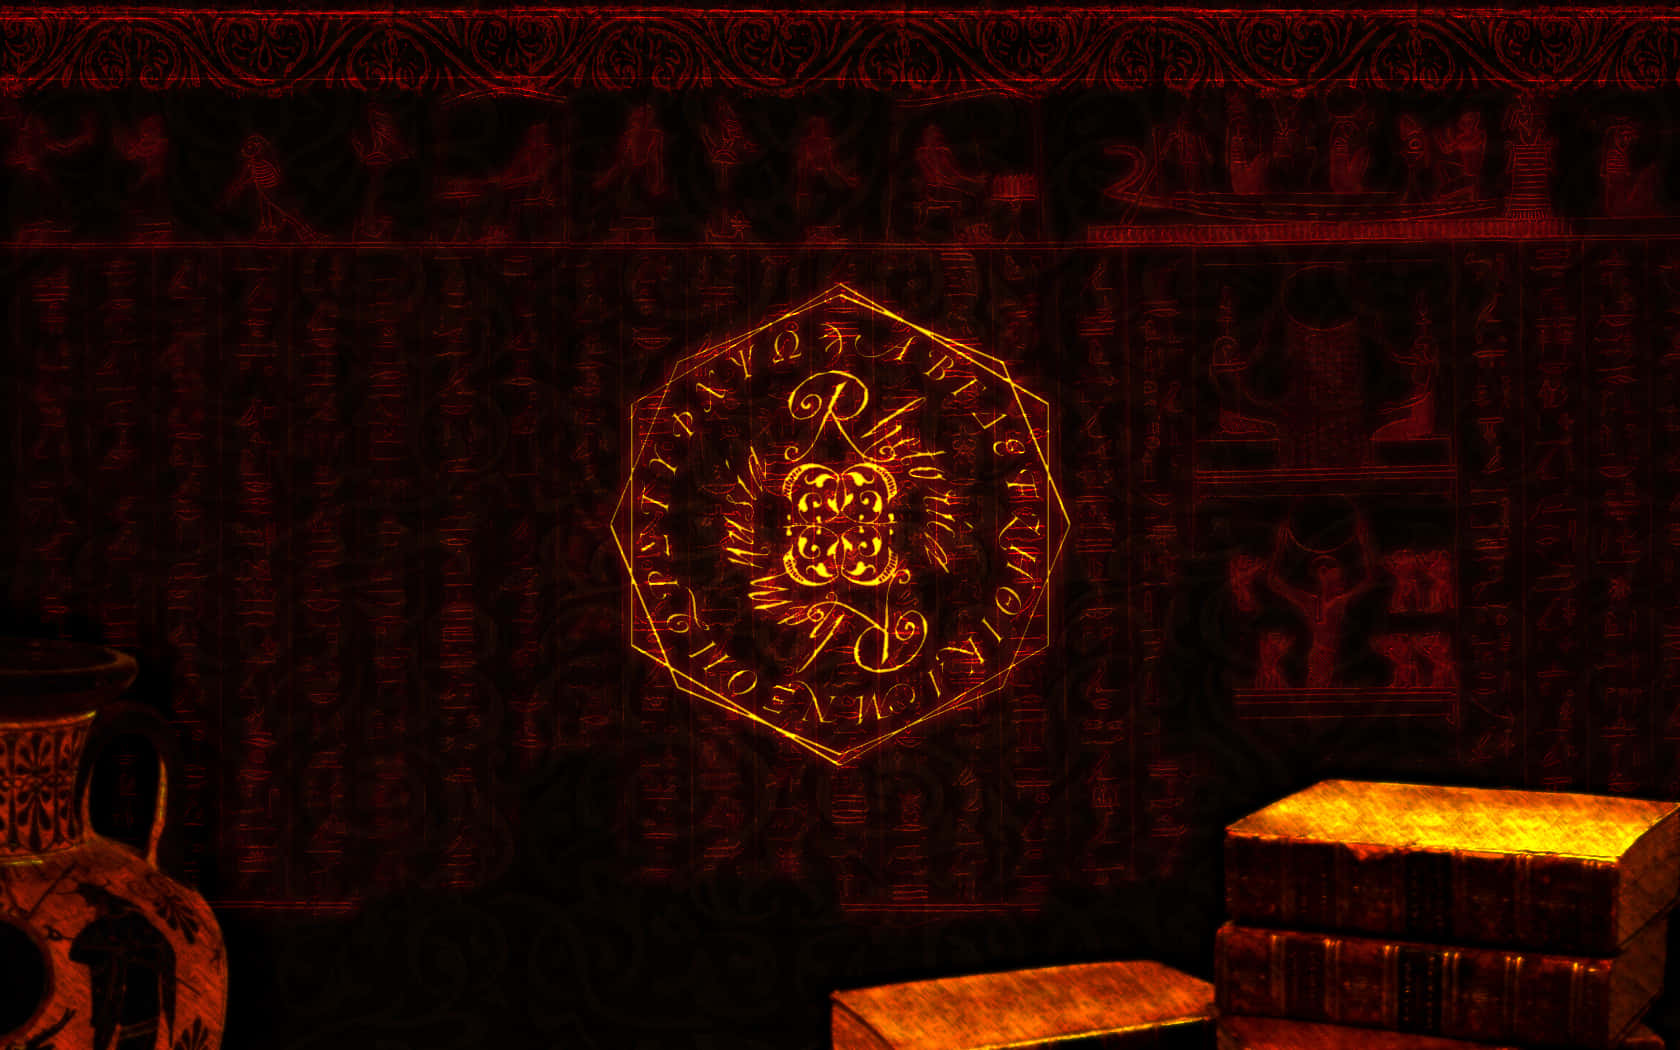 Mysterious Occult Symbols on a Dark Background Wallpaper